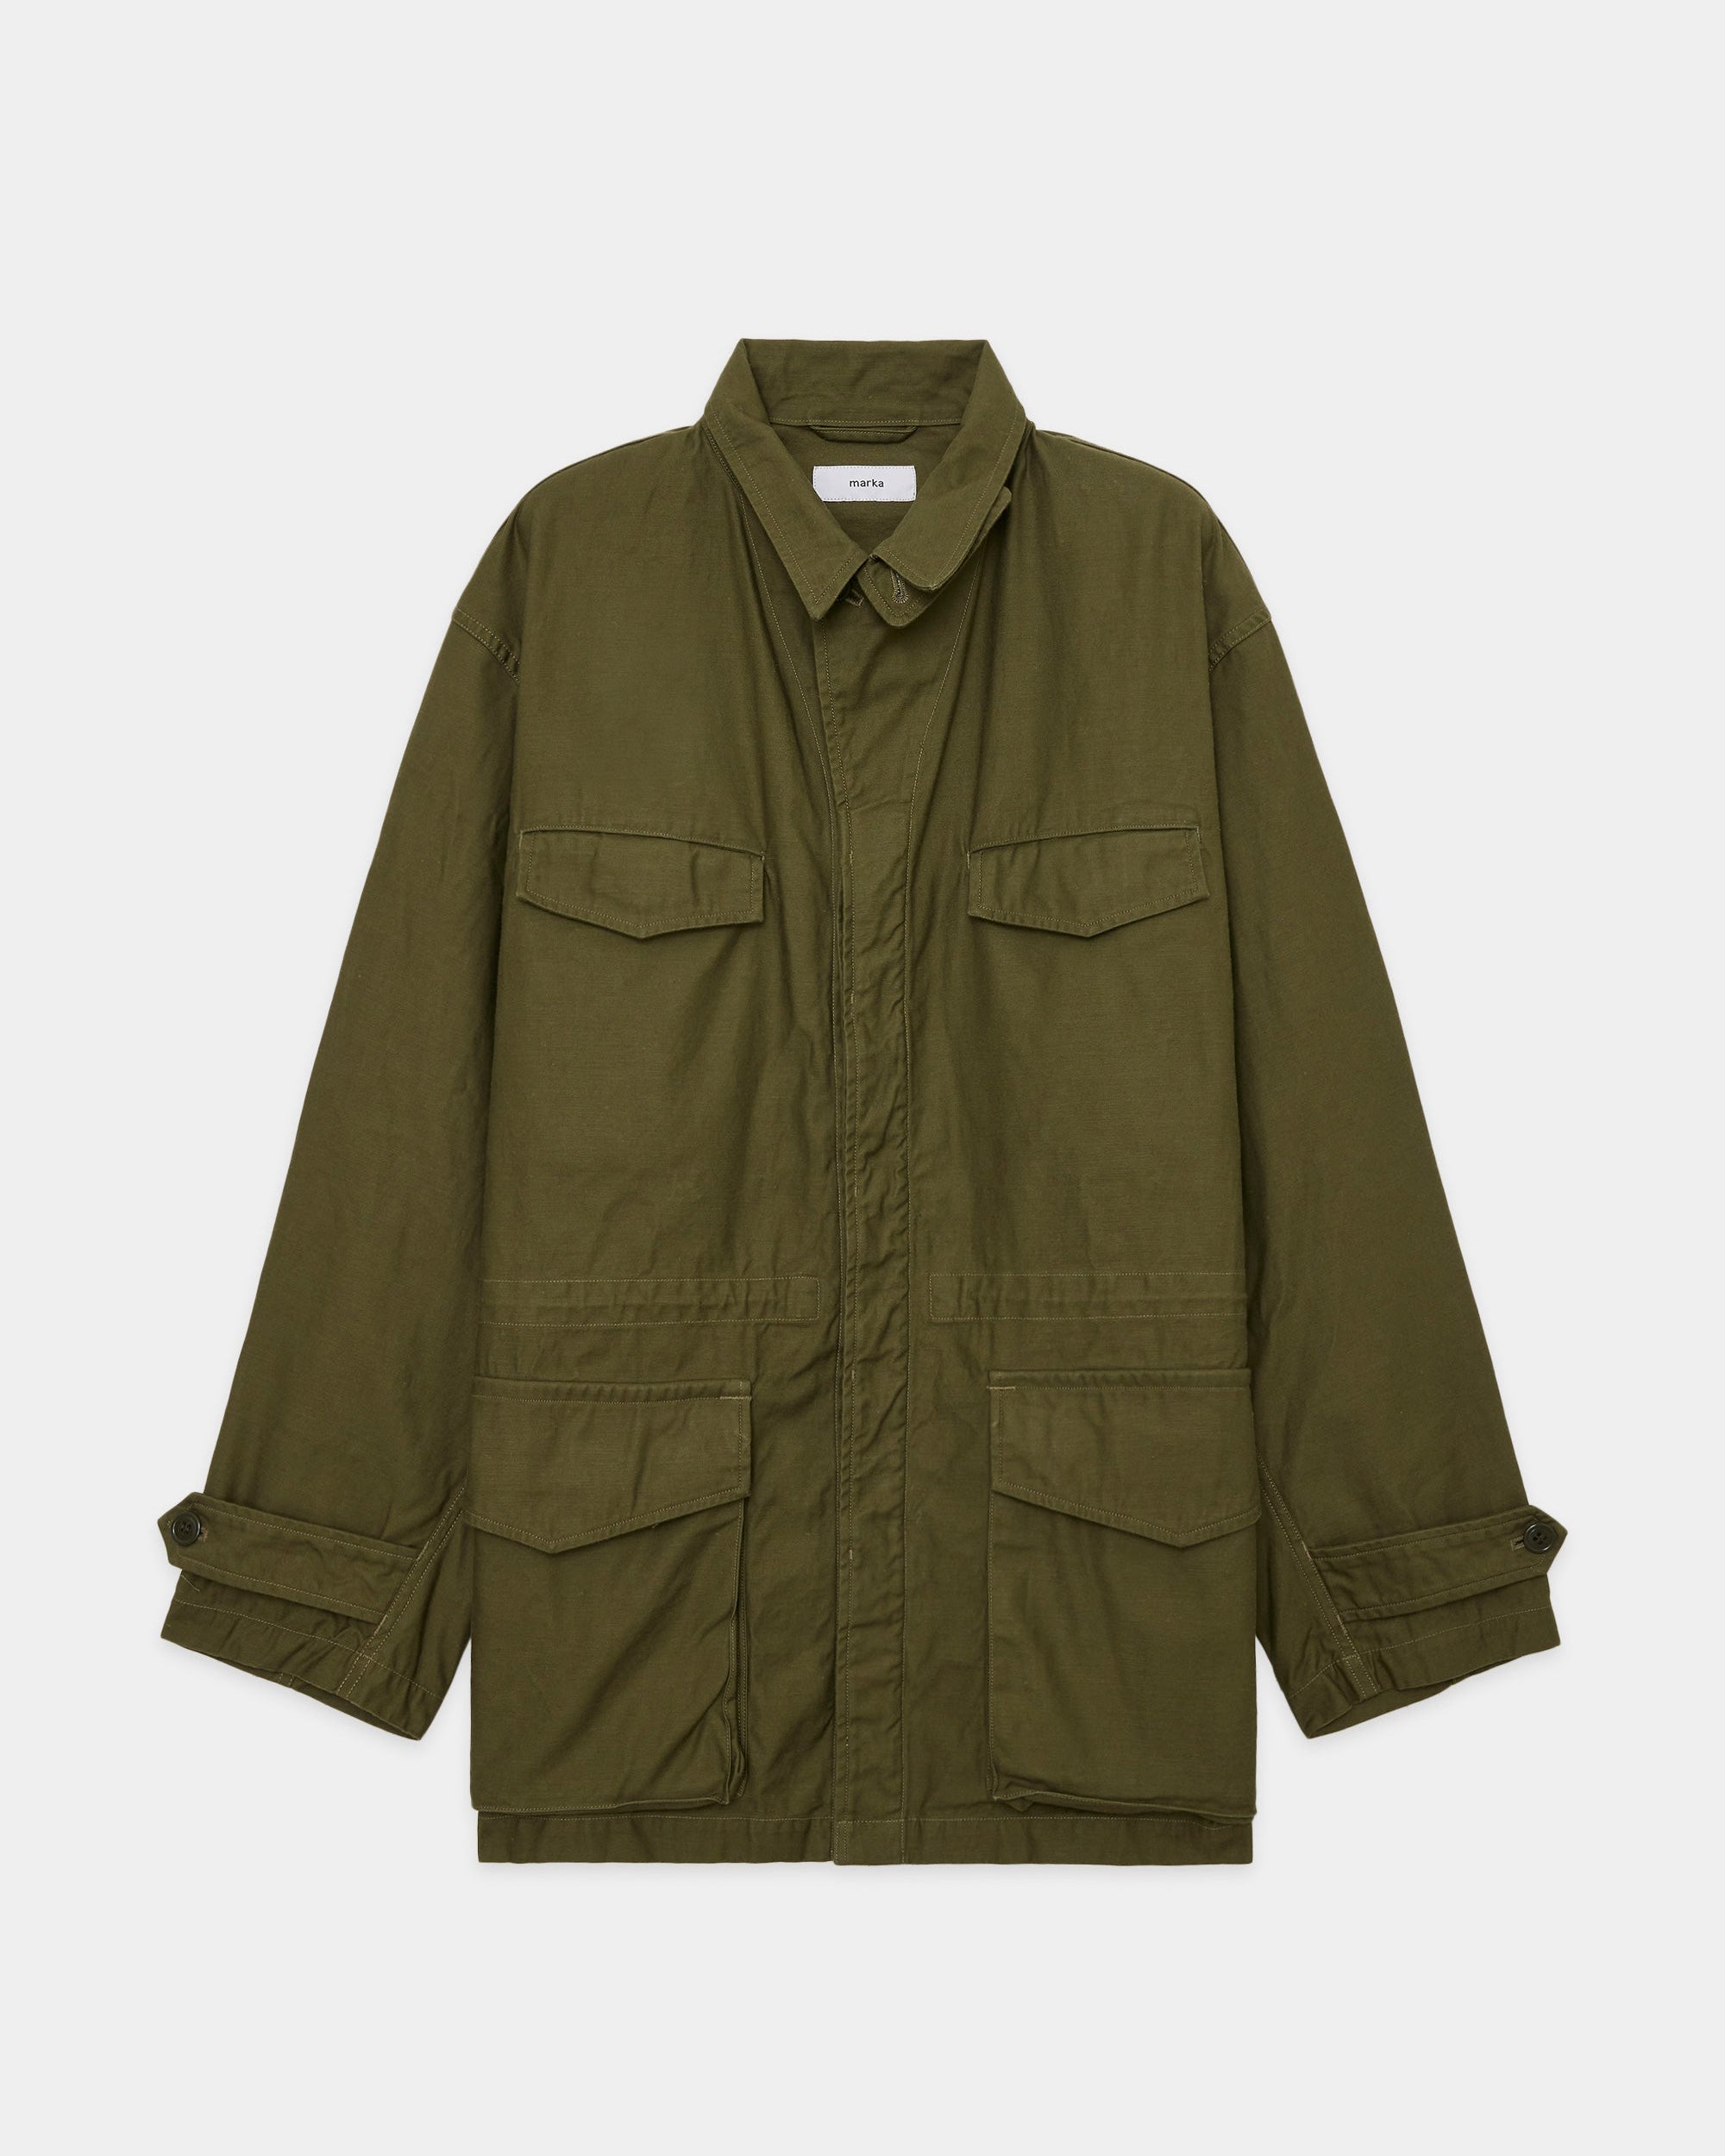 FIELD JACKET OLIVE – TIME AFTER TIME